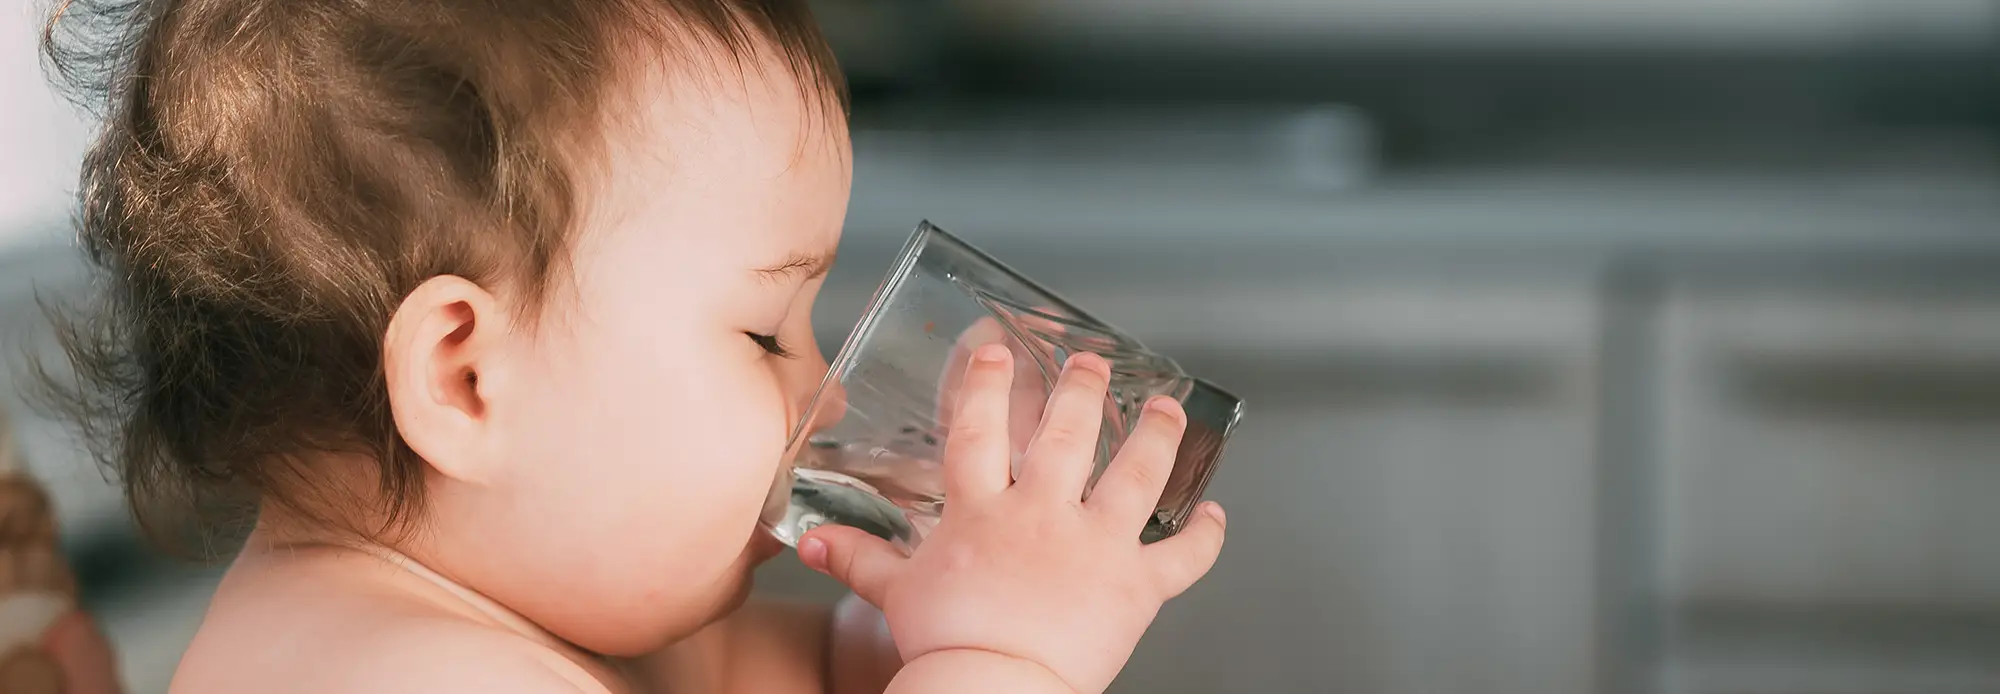 side view of a baby drinking a glass cup of water